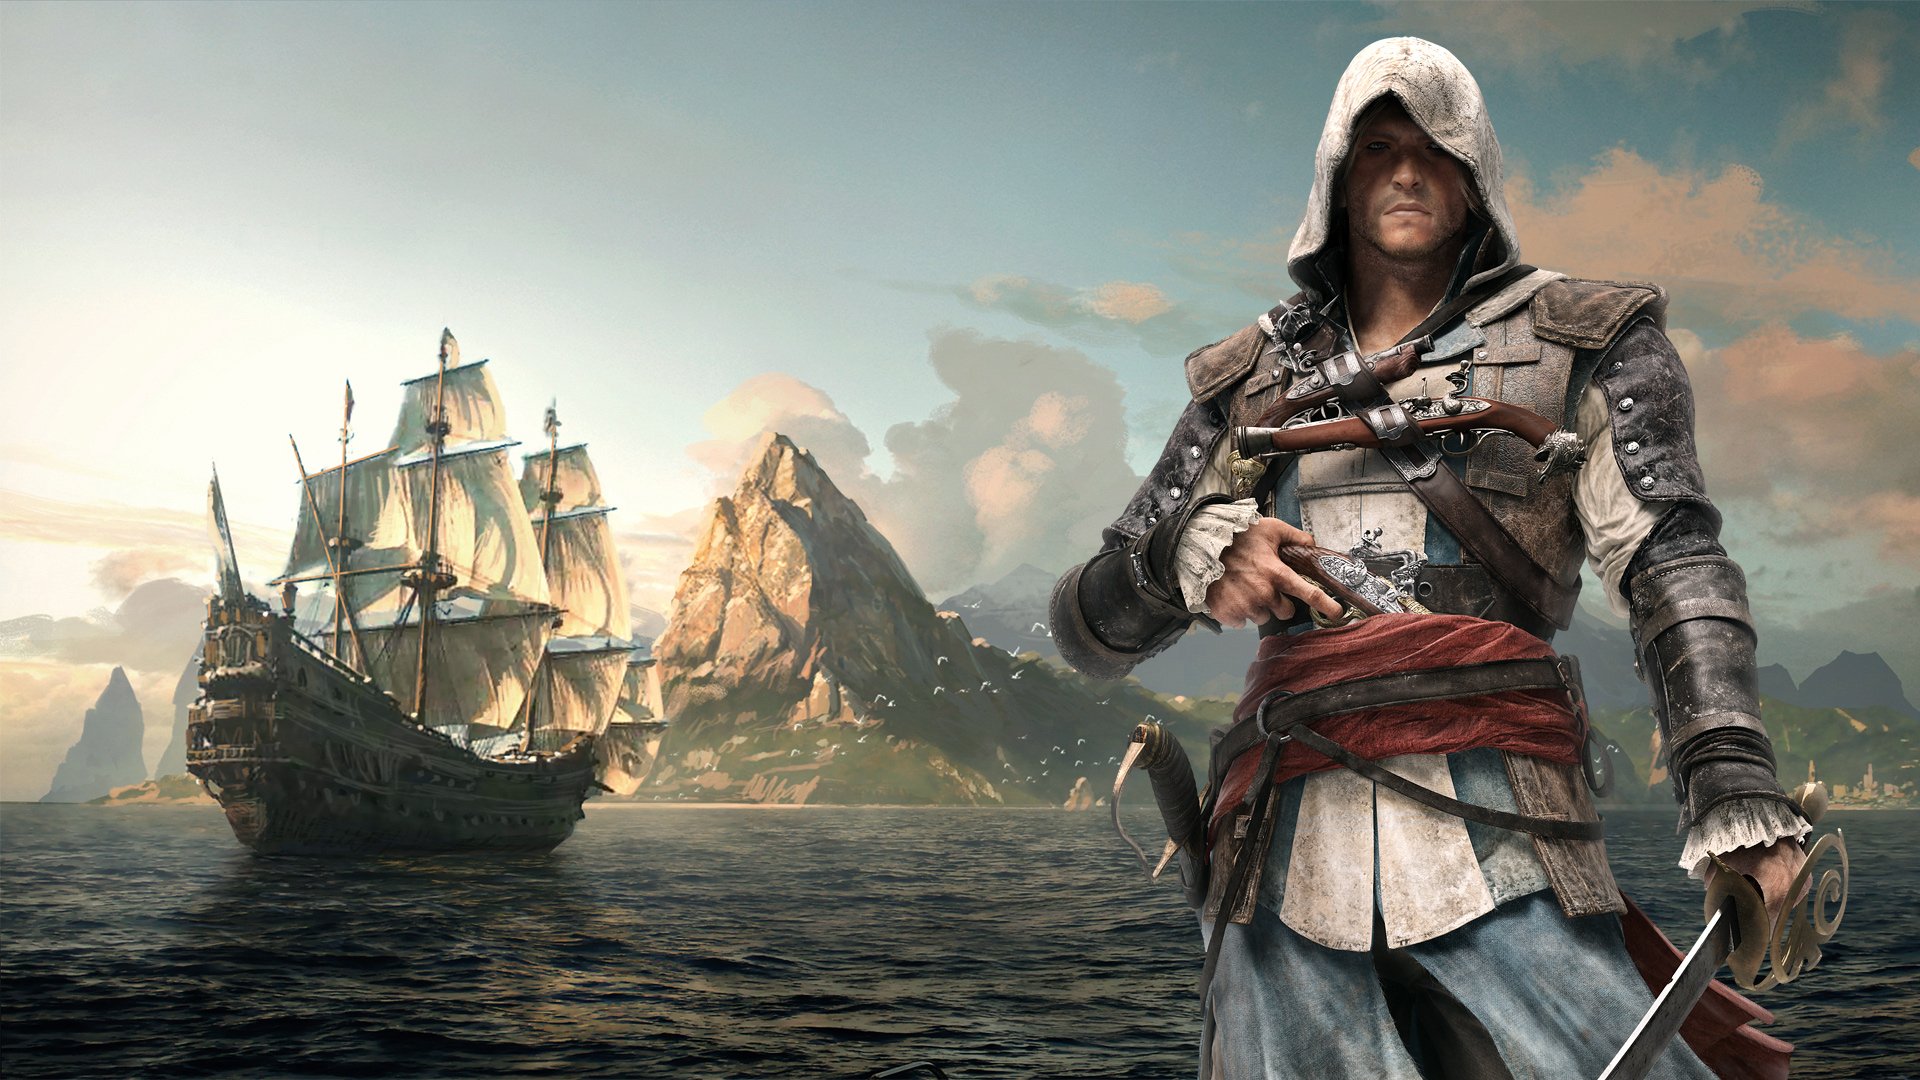 assassin creed 4 pc game free download full version